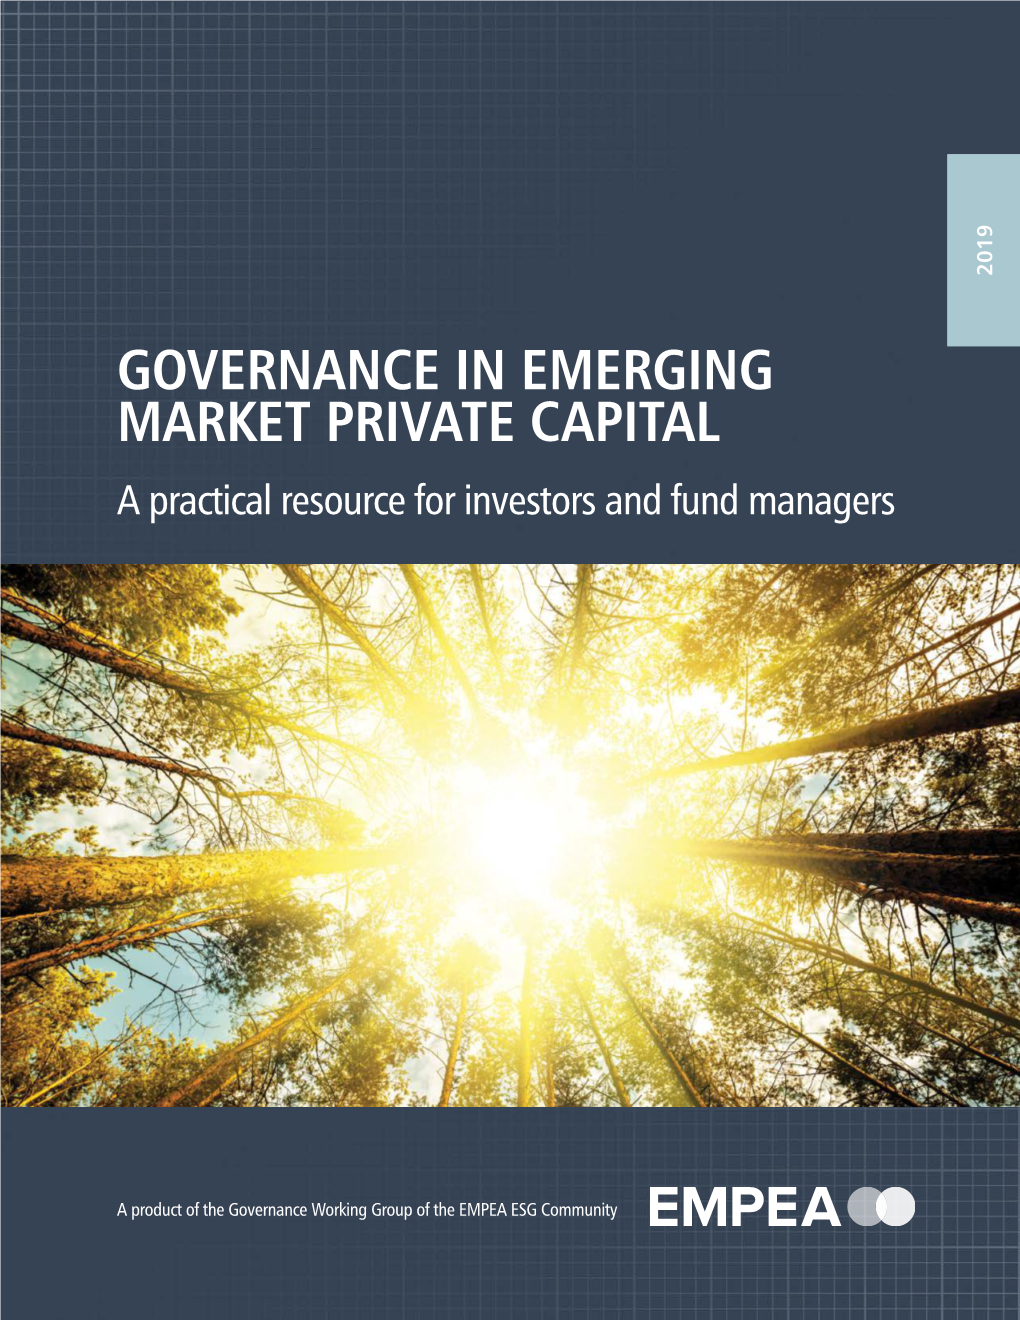 GOVERNANCE in EMERGING MARKET PRIVATE CAPITAL a Practical Resource for Investors and Fund Managers